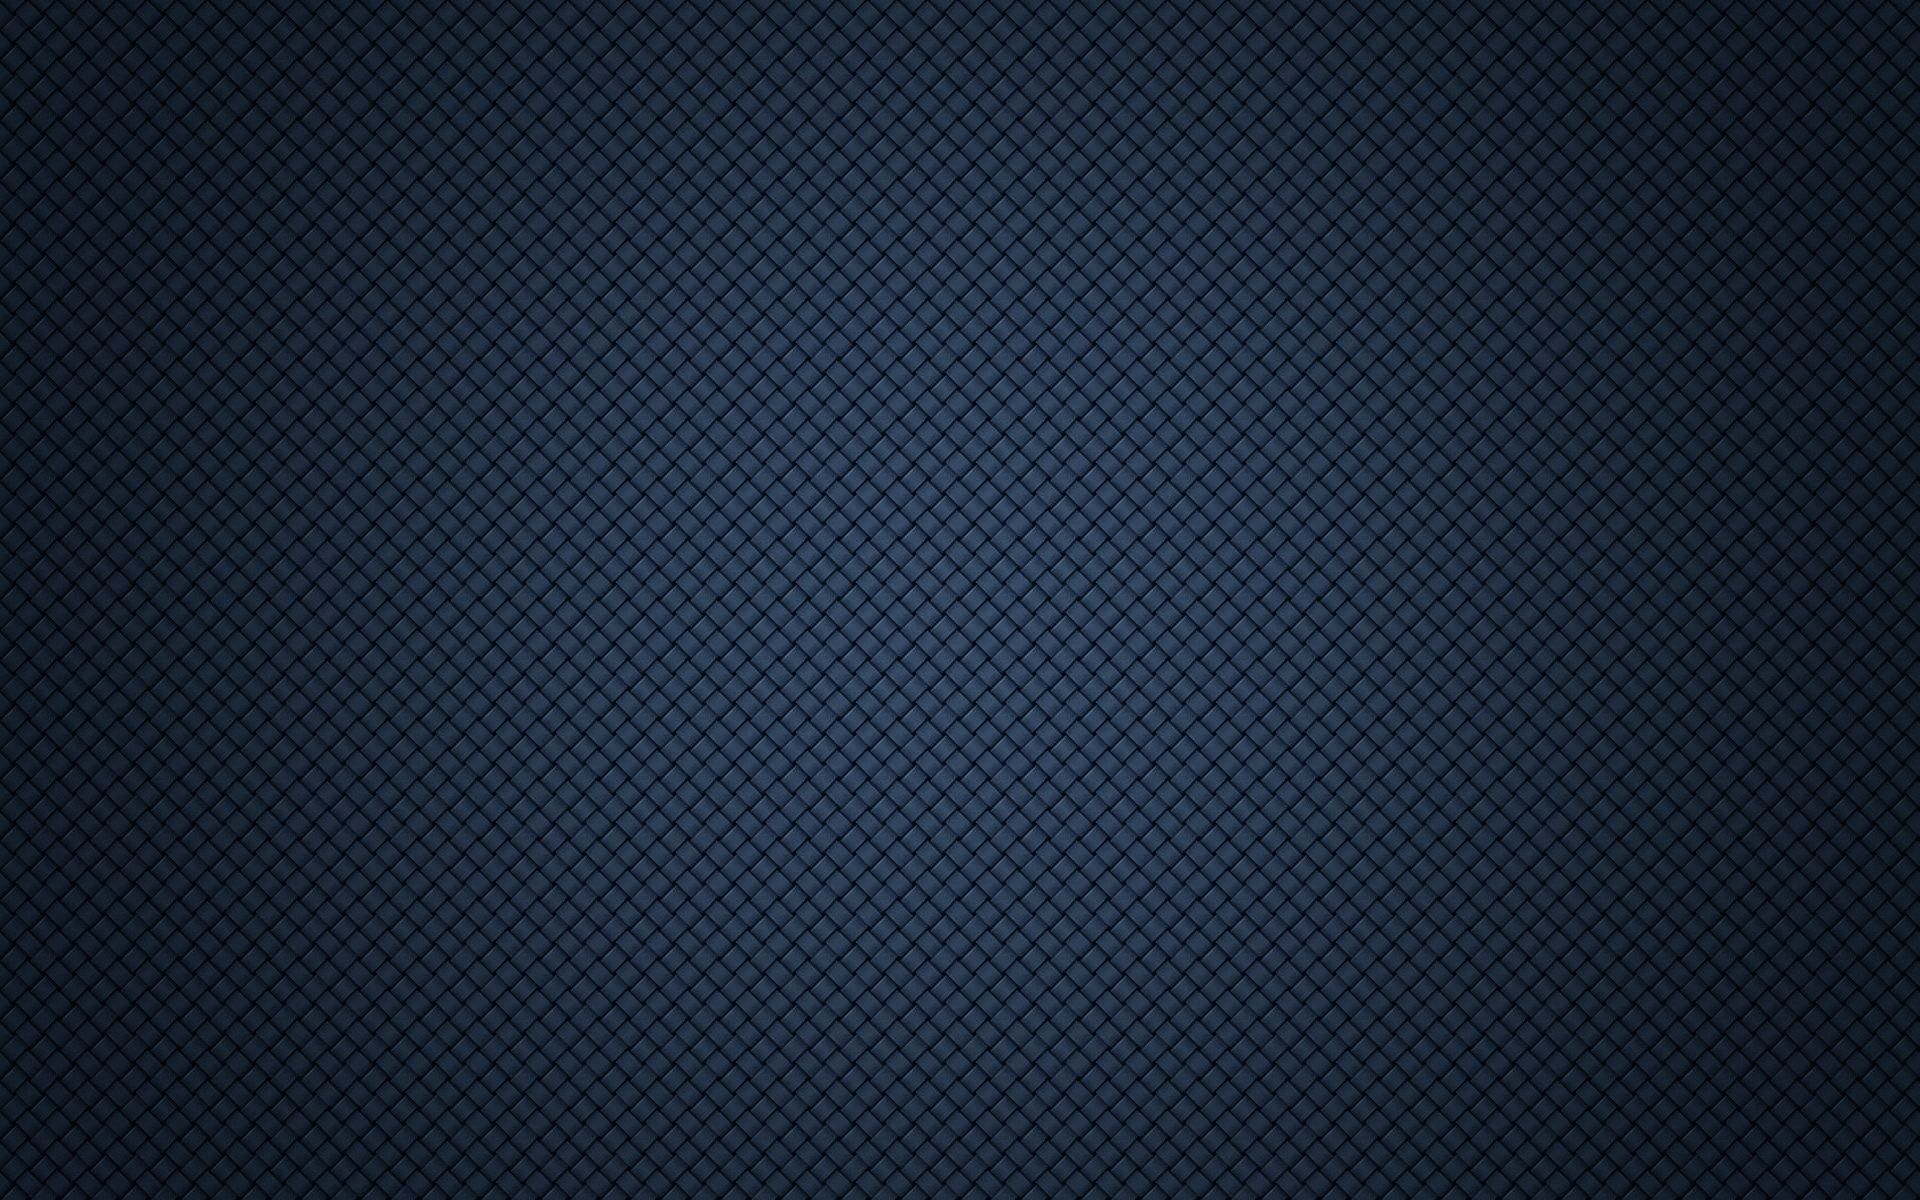 Popular Texture Image for Phone